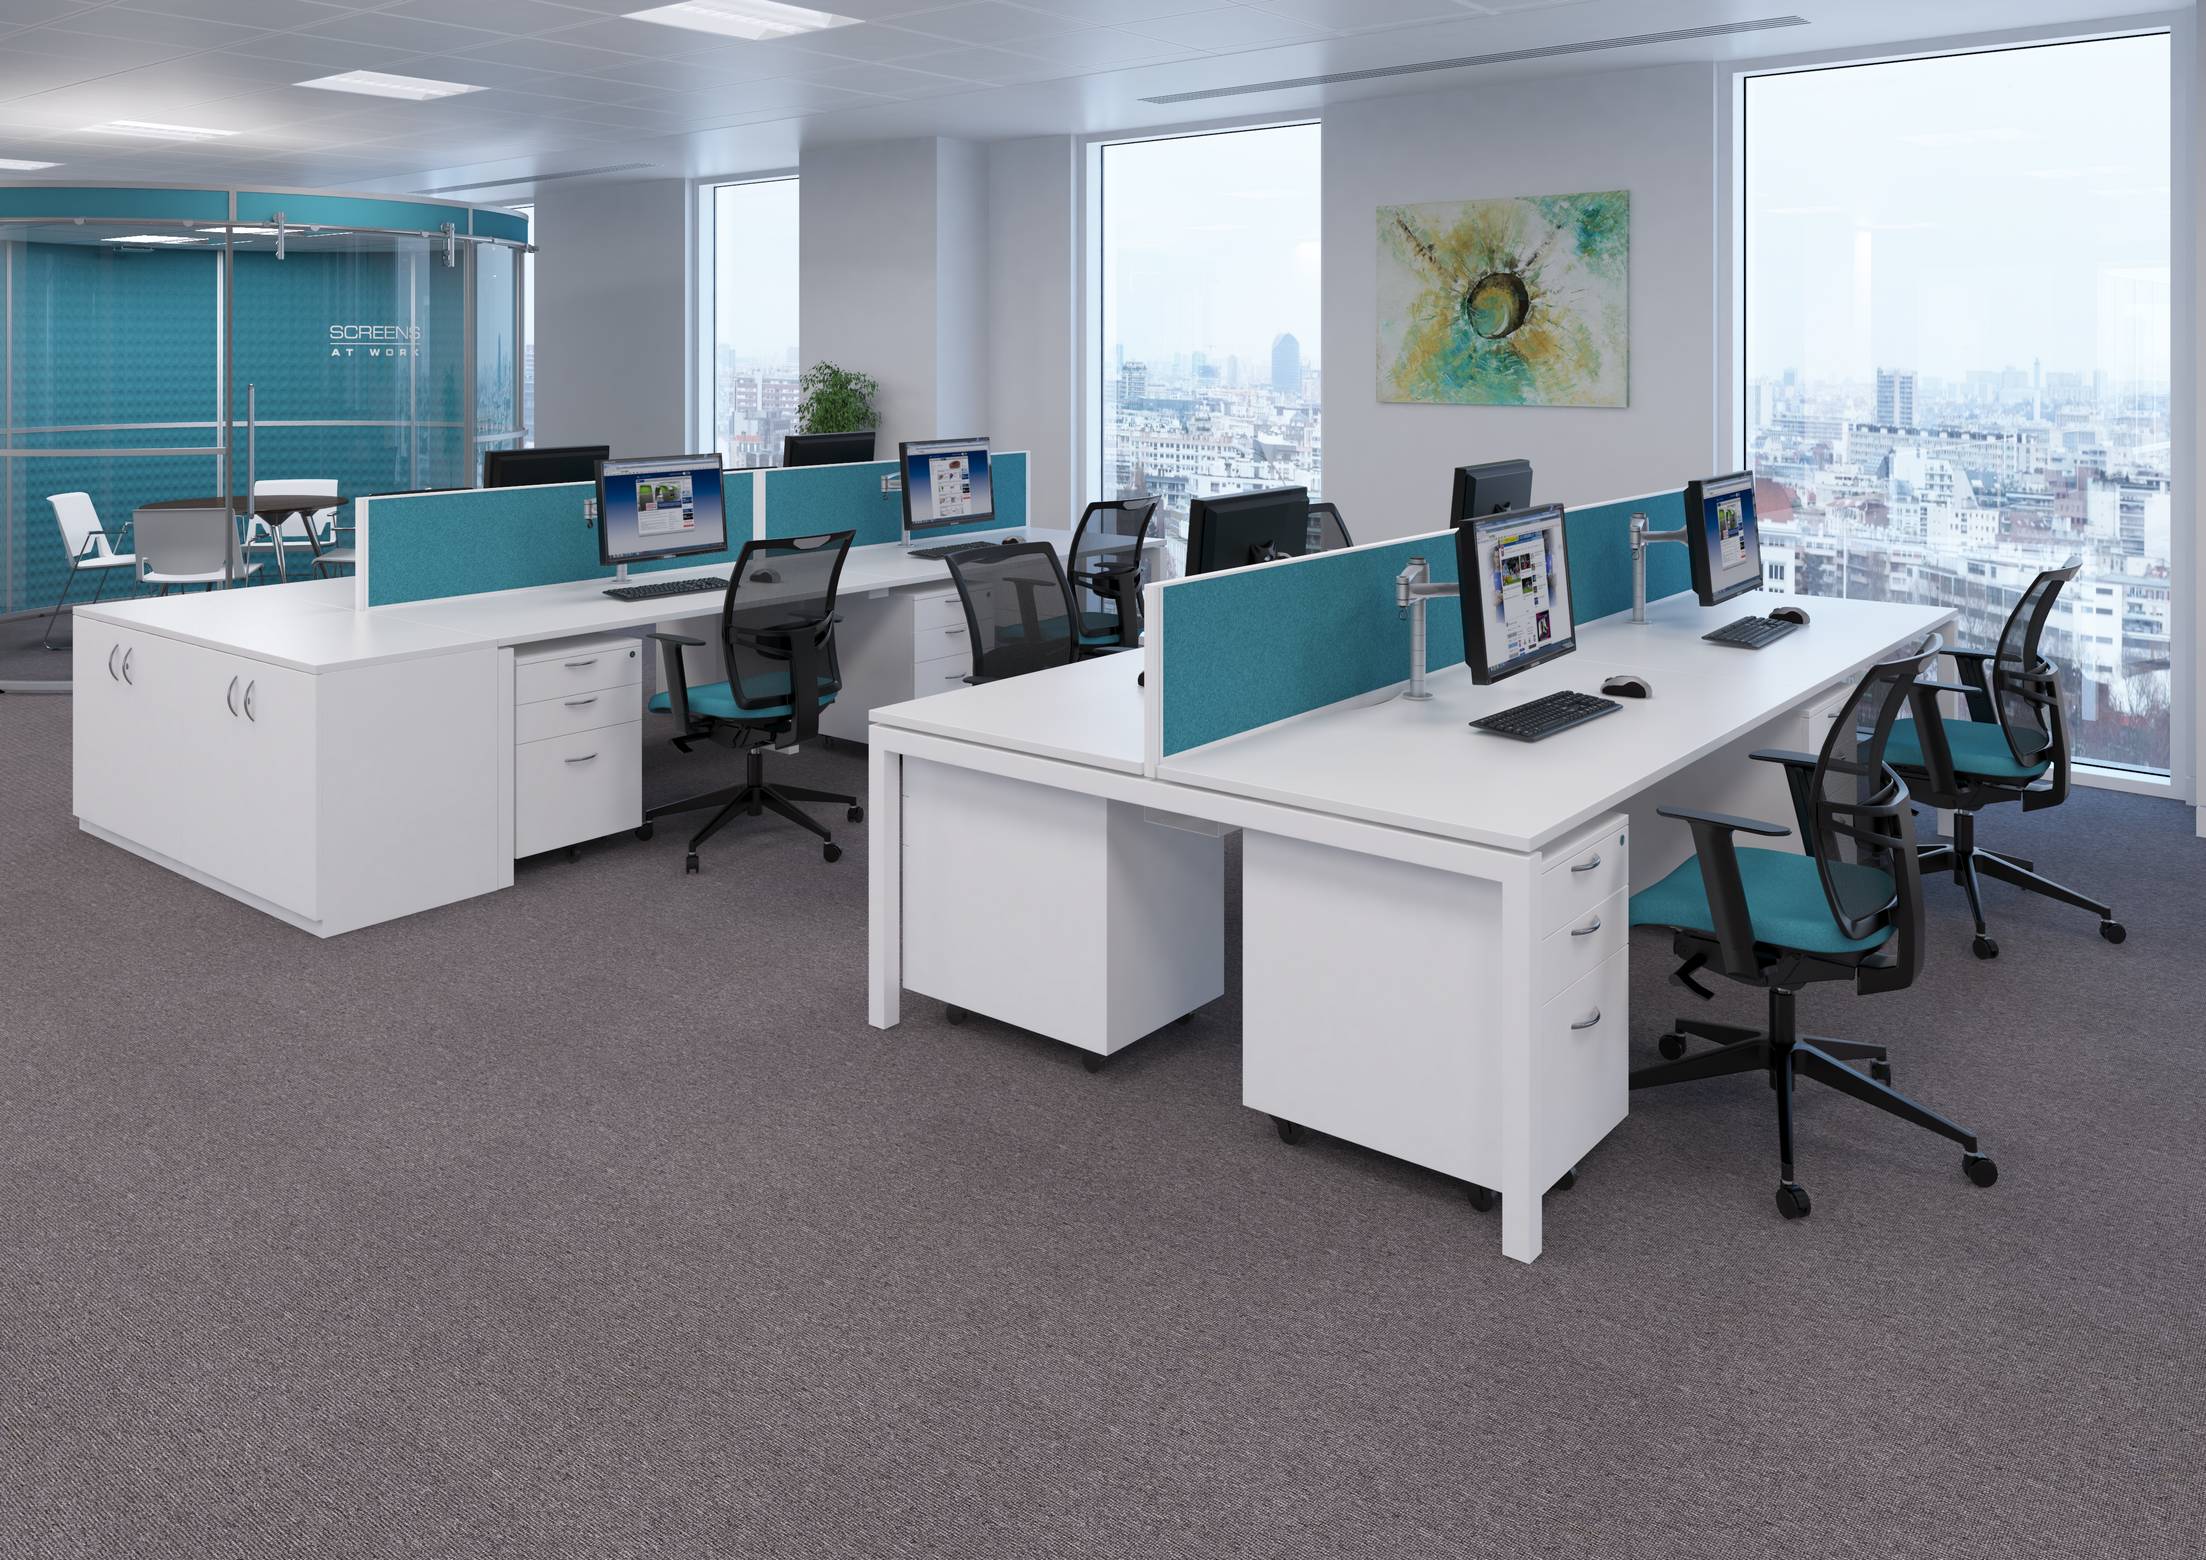 Where to Start with Your Office Layout Planning - Wilcox Office Mart